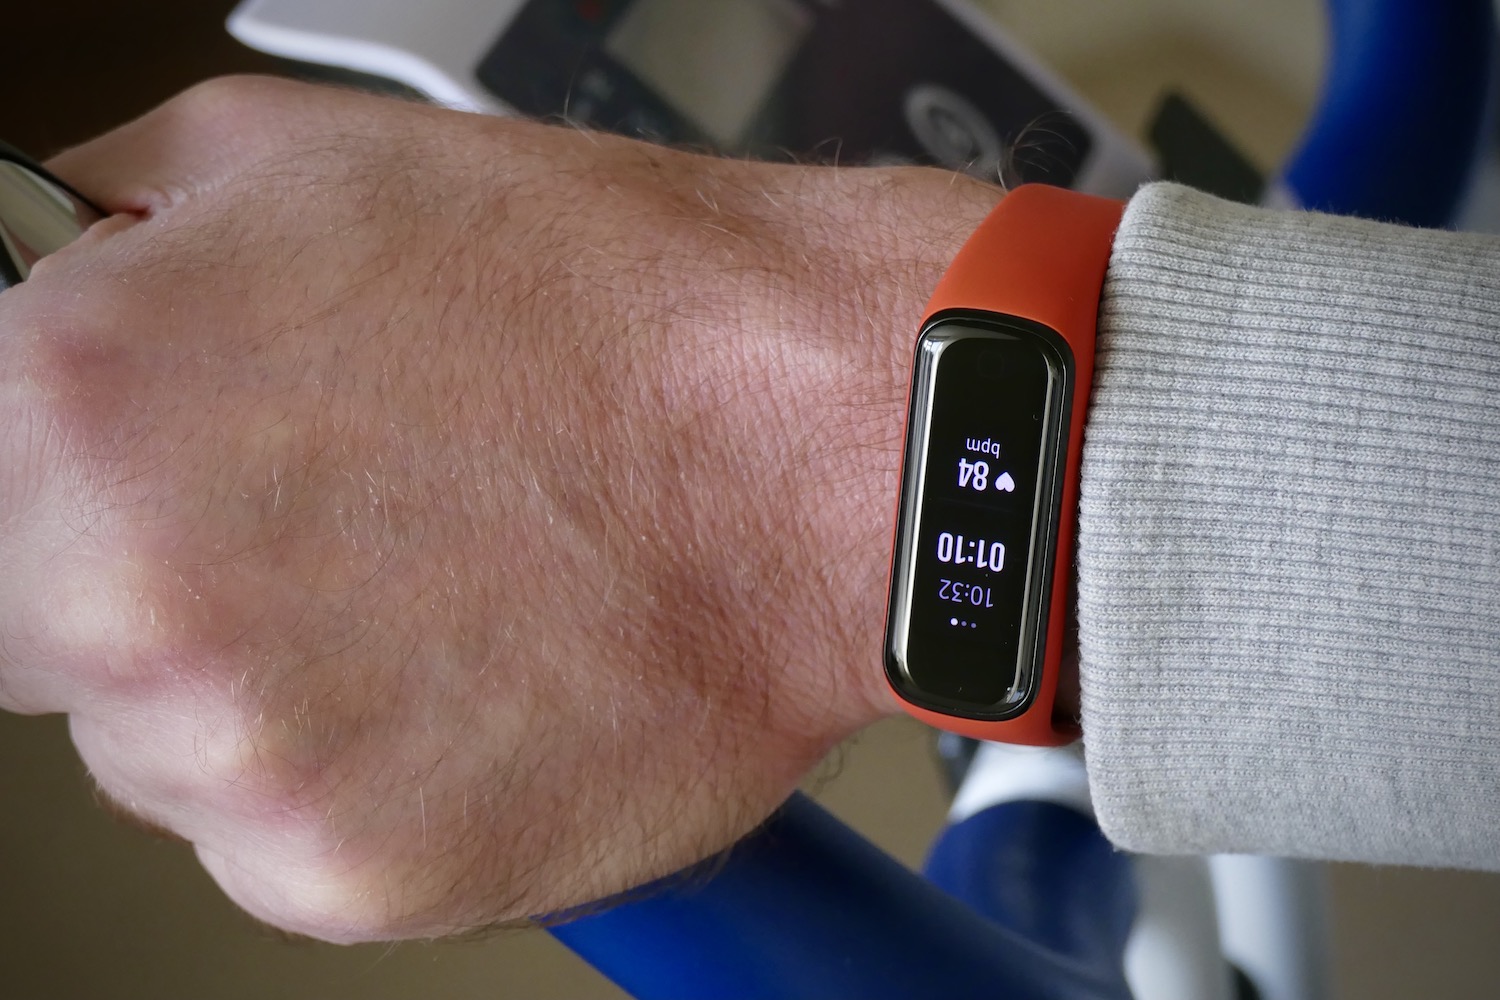 Samsung Galaxy Fit 2 Review: Simple and Honest